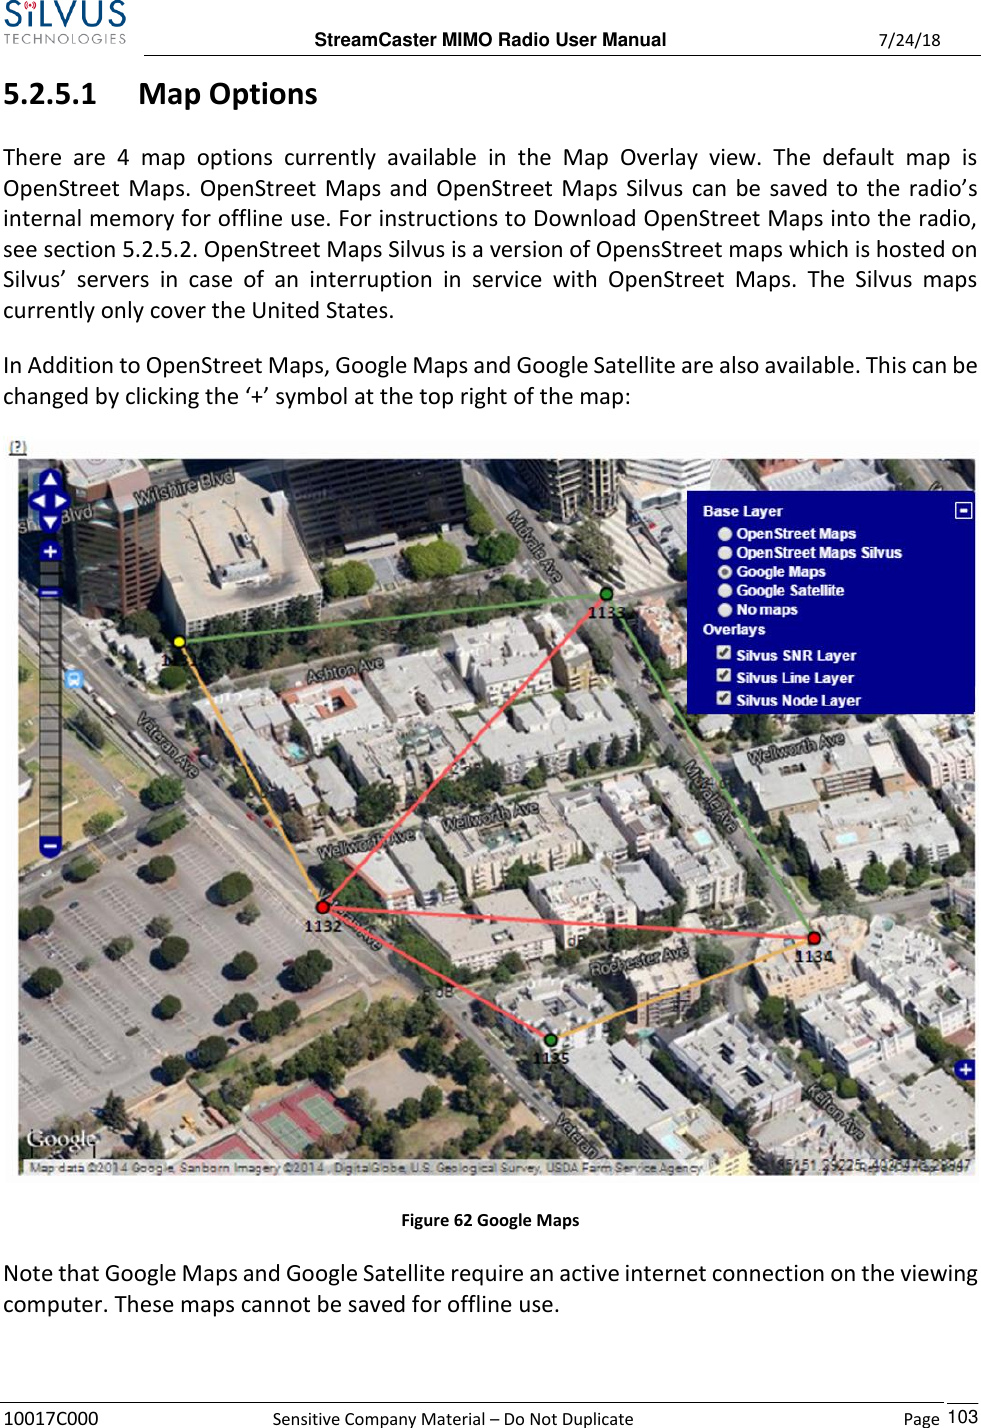  StreamCaster MIMO Radio User Manual  7/24/18 10017C000  Sensitive Company Material – Do Not Duplicate    Page    103 5.2.5.1 Map Options There  are  4  map  options  currently  available  in  the  Map  Overlay  view.  The  default  map  is OpenStreet Maps. OpenStreet Maps and OpenStreet Maps Silvus can be saved to the radio’s internal memory for offline use. For instructions to Download OpenStreet Maps into the radio, see section 5.2.5.2. OpenStreet Maps Silvus is a version of OpensStreet maps which is hosted on Silvus’  servers  in  case  of  an  interruption  in  service  with  OpenStreet  Maps.  The  Silvus  maps currently only cover the United States.  In Addition to OpenStreet Maps, Google Maps and Google Satellite are also available. This can be changed by clicking the ‘+’ symbol at the top right of the map:  Figure 62 Google Maps Note that Google Maps and Google Satellite require an active internet connection on the viewing computer. These maps cannot be saved for offline use.  